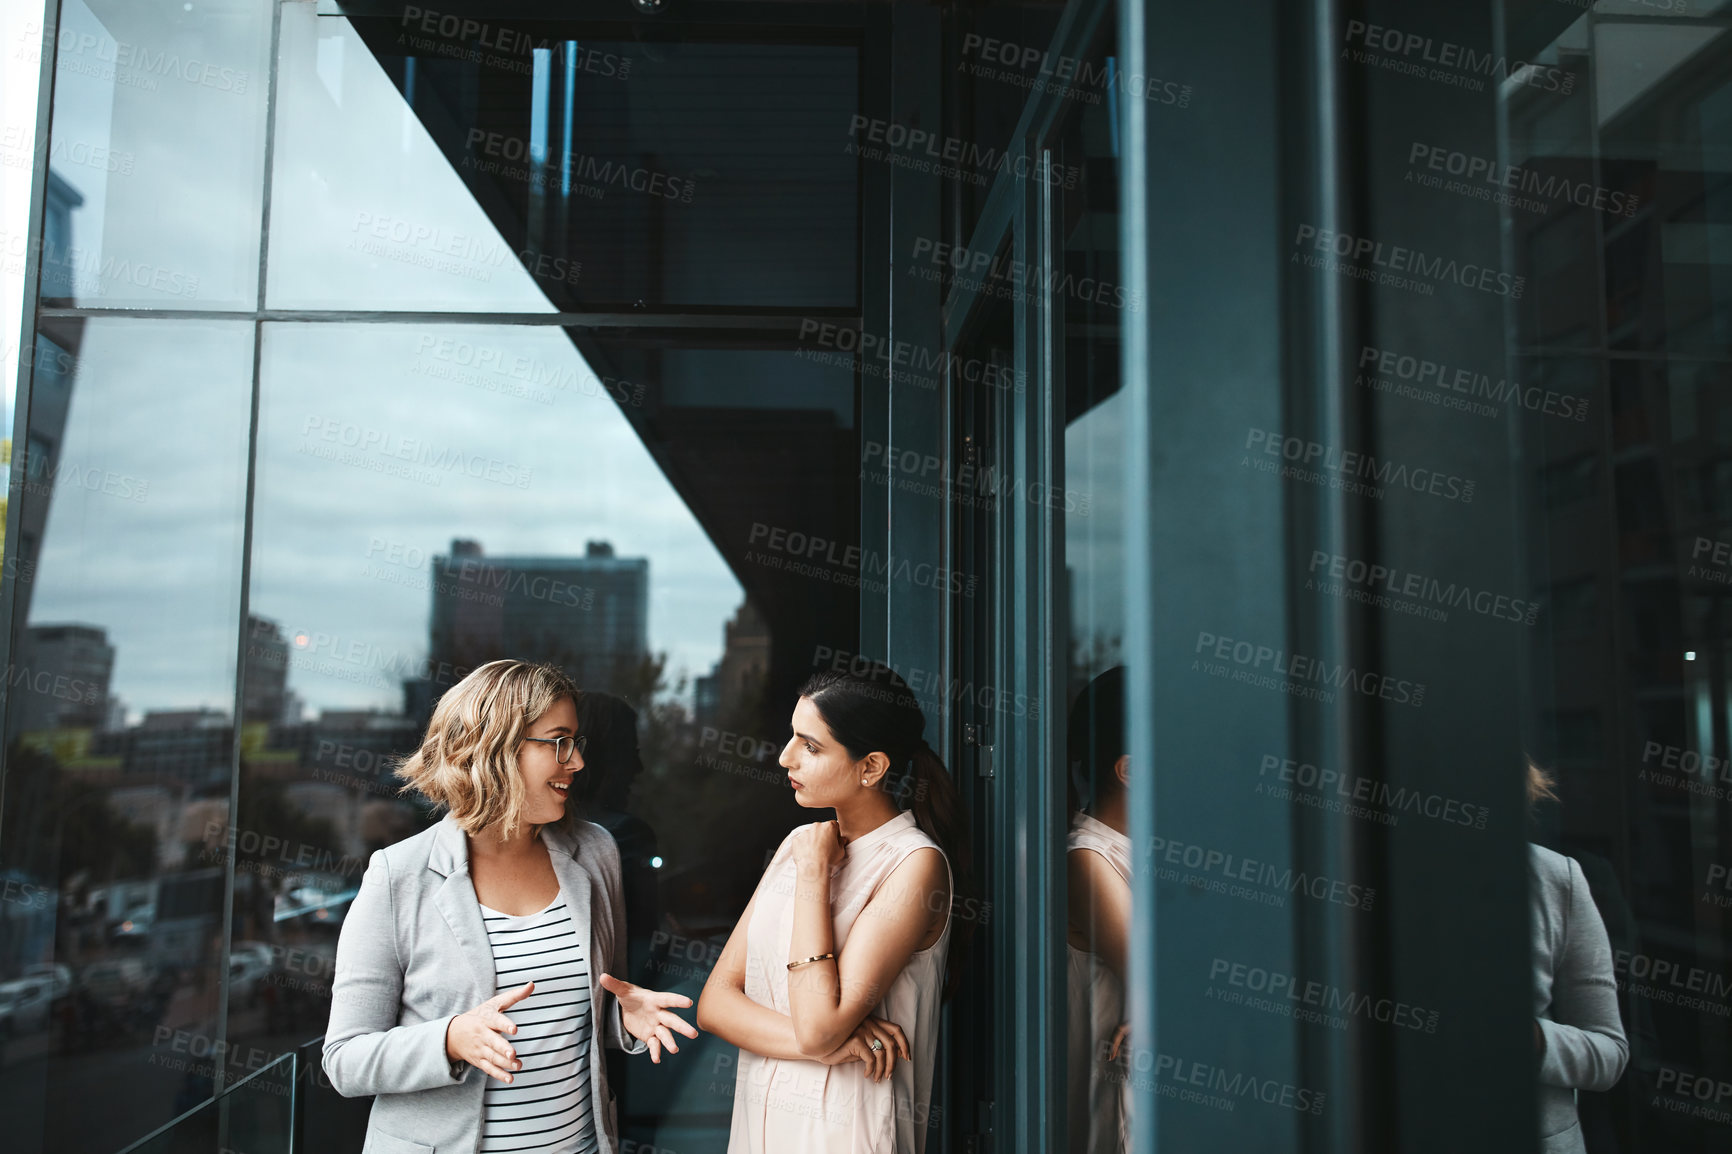 Buy stock photo Shot of two businesswomen having a discussion on the office balcony